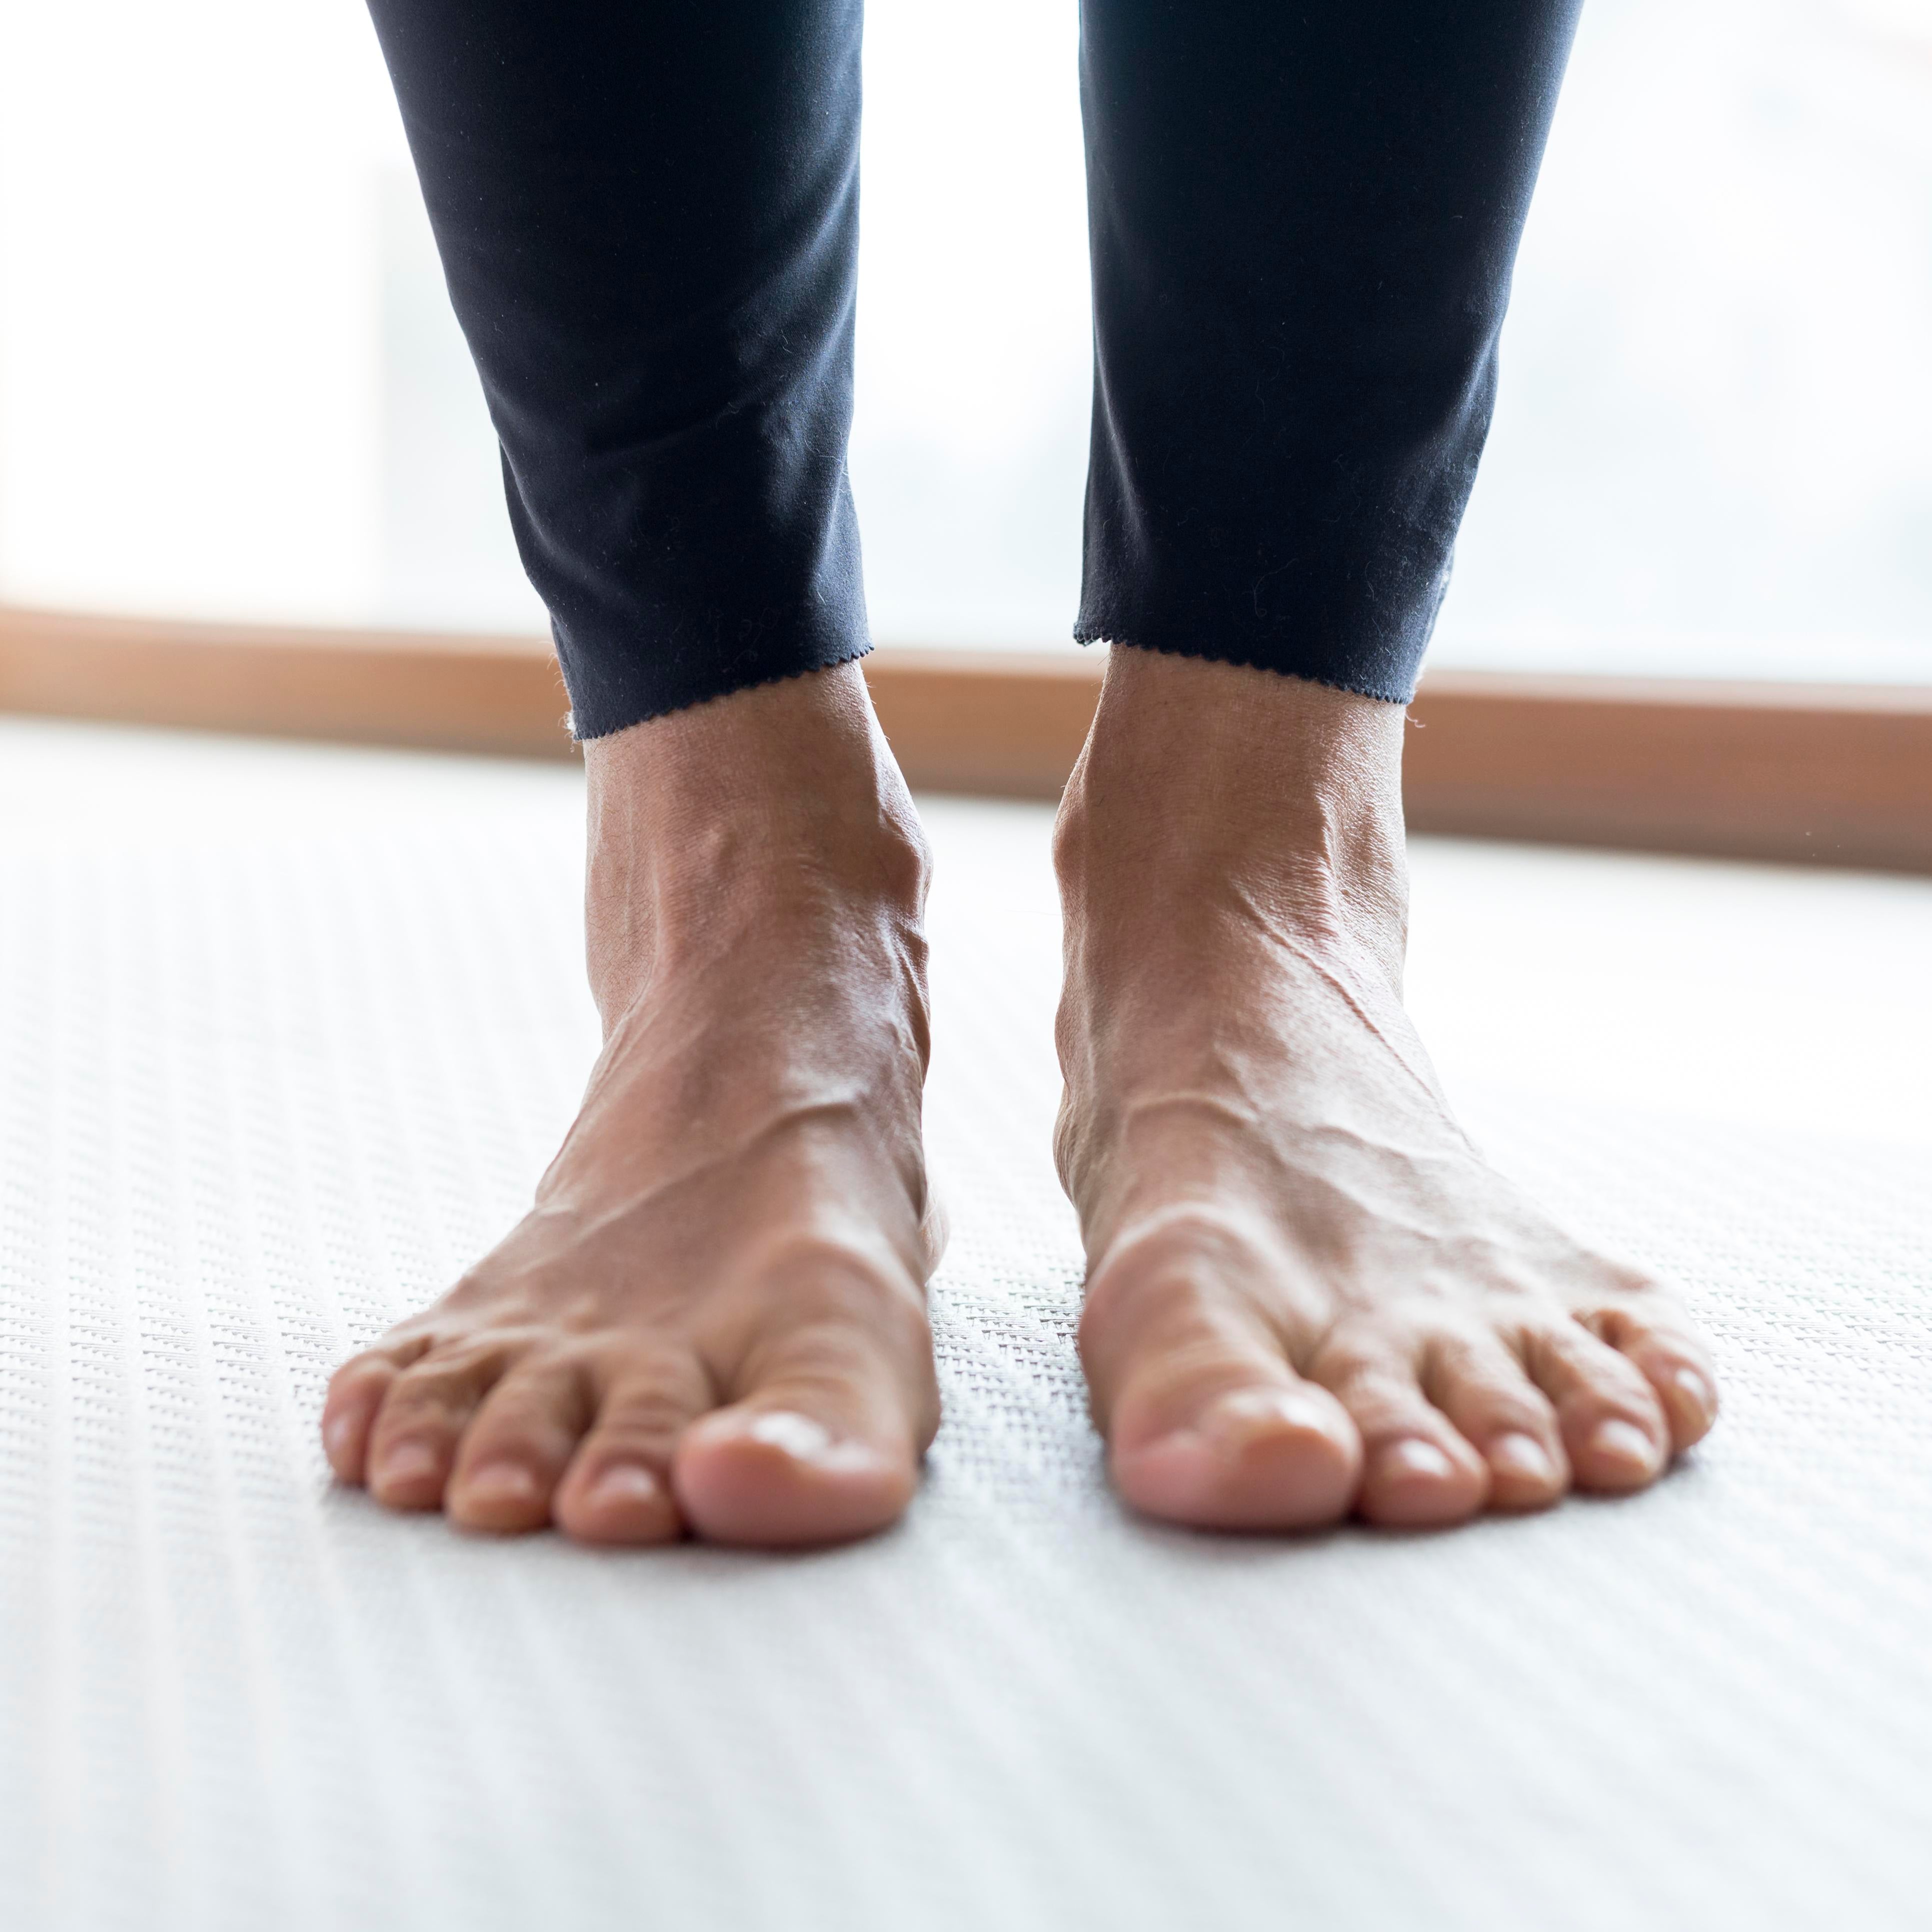 Foot Problems in Indian Households: Happy Feet's Anti-Fatigue Mats to the Rescue